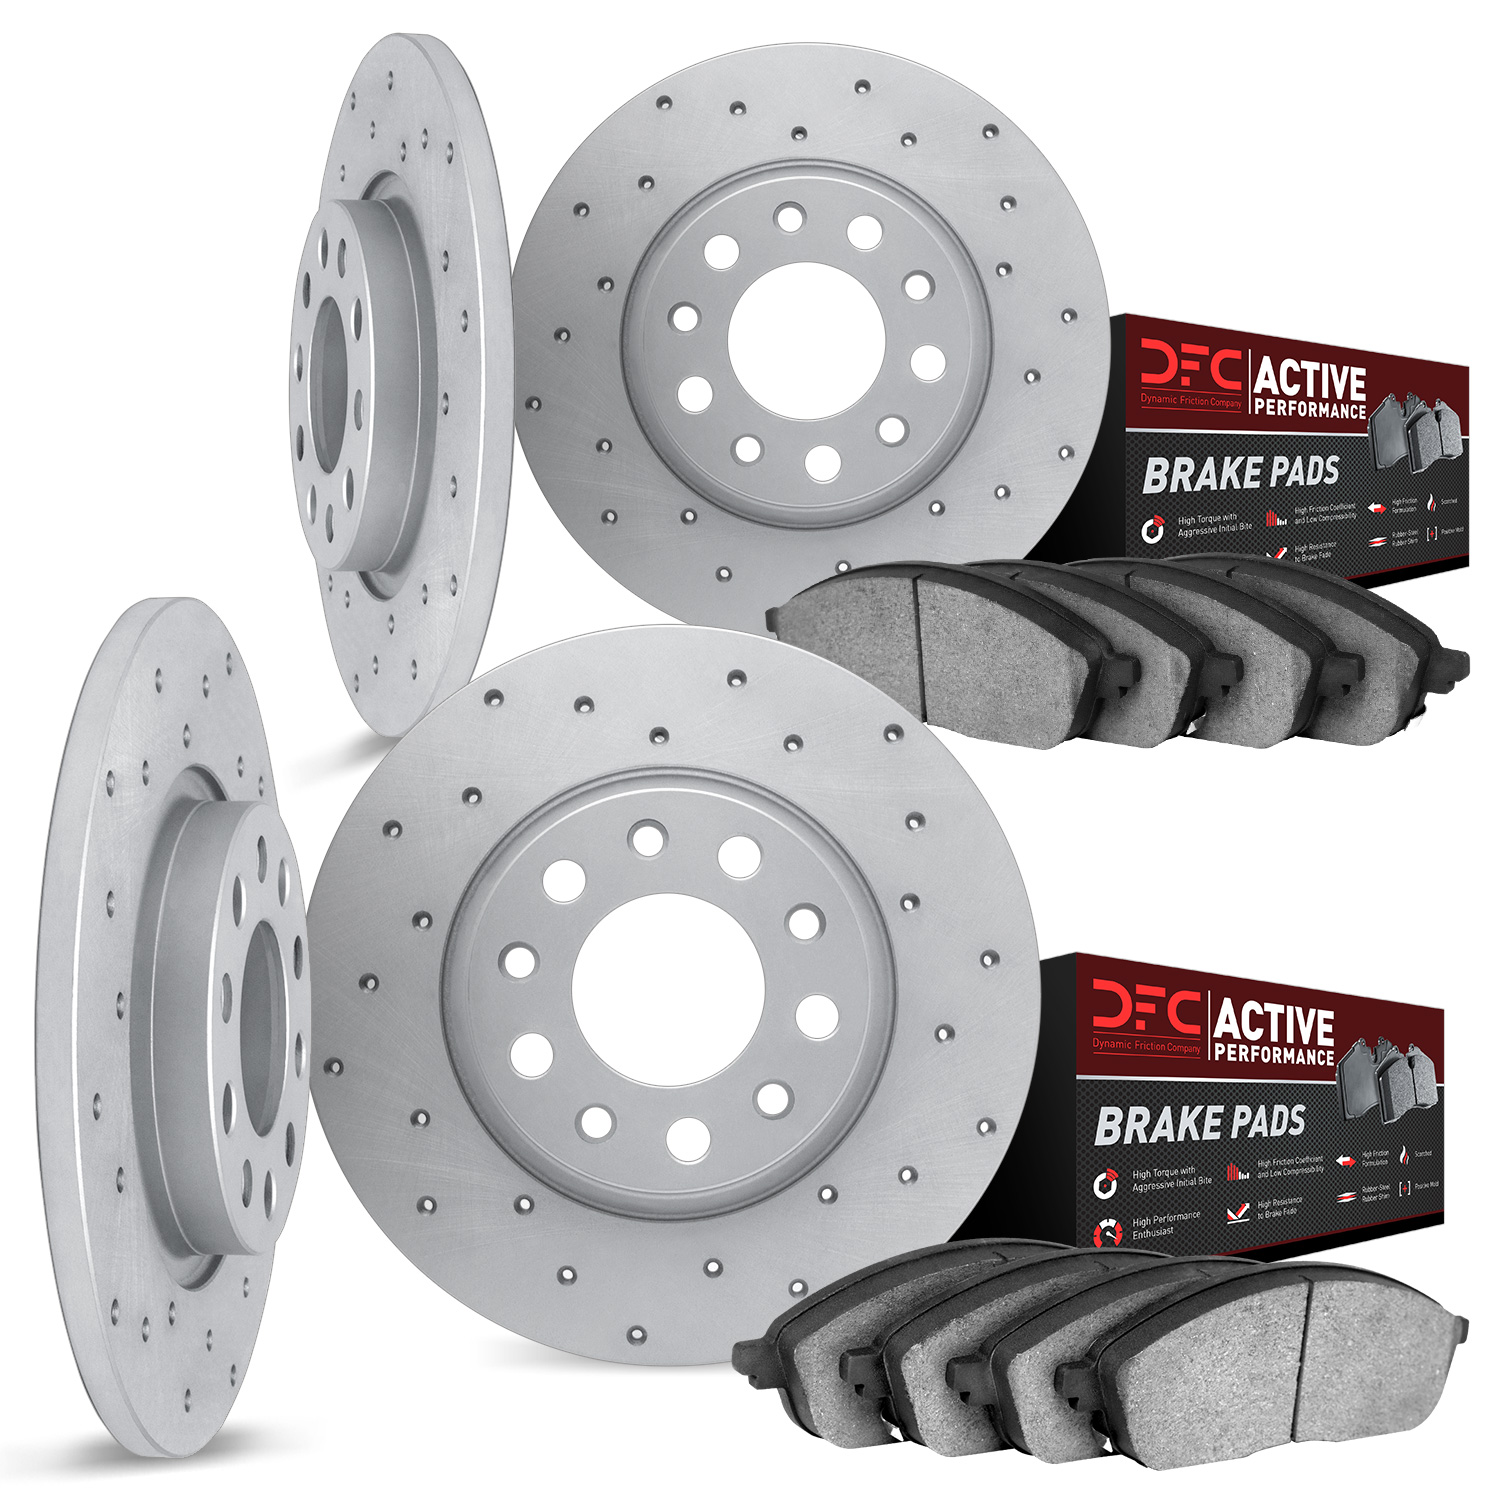 2704-31026 Geoperformance Drilled Brake Rotors with Active Performance Pads Kit, 1996-1998 BMW, Position: Front and Rear